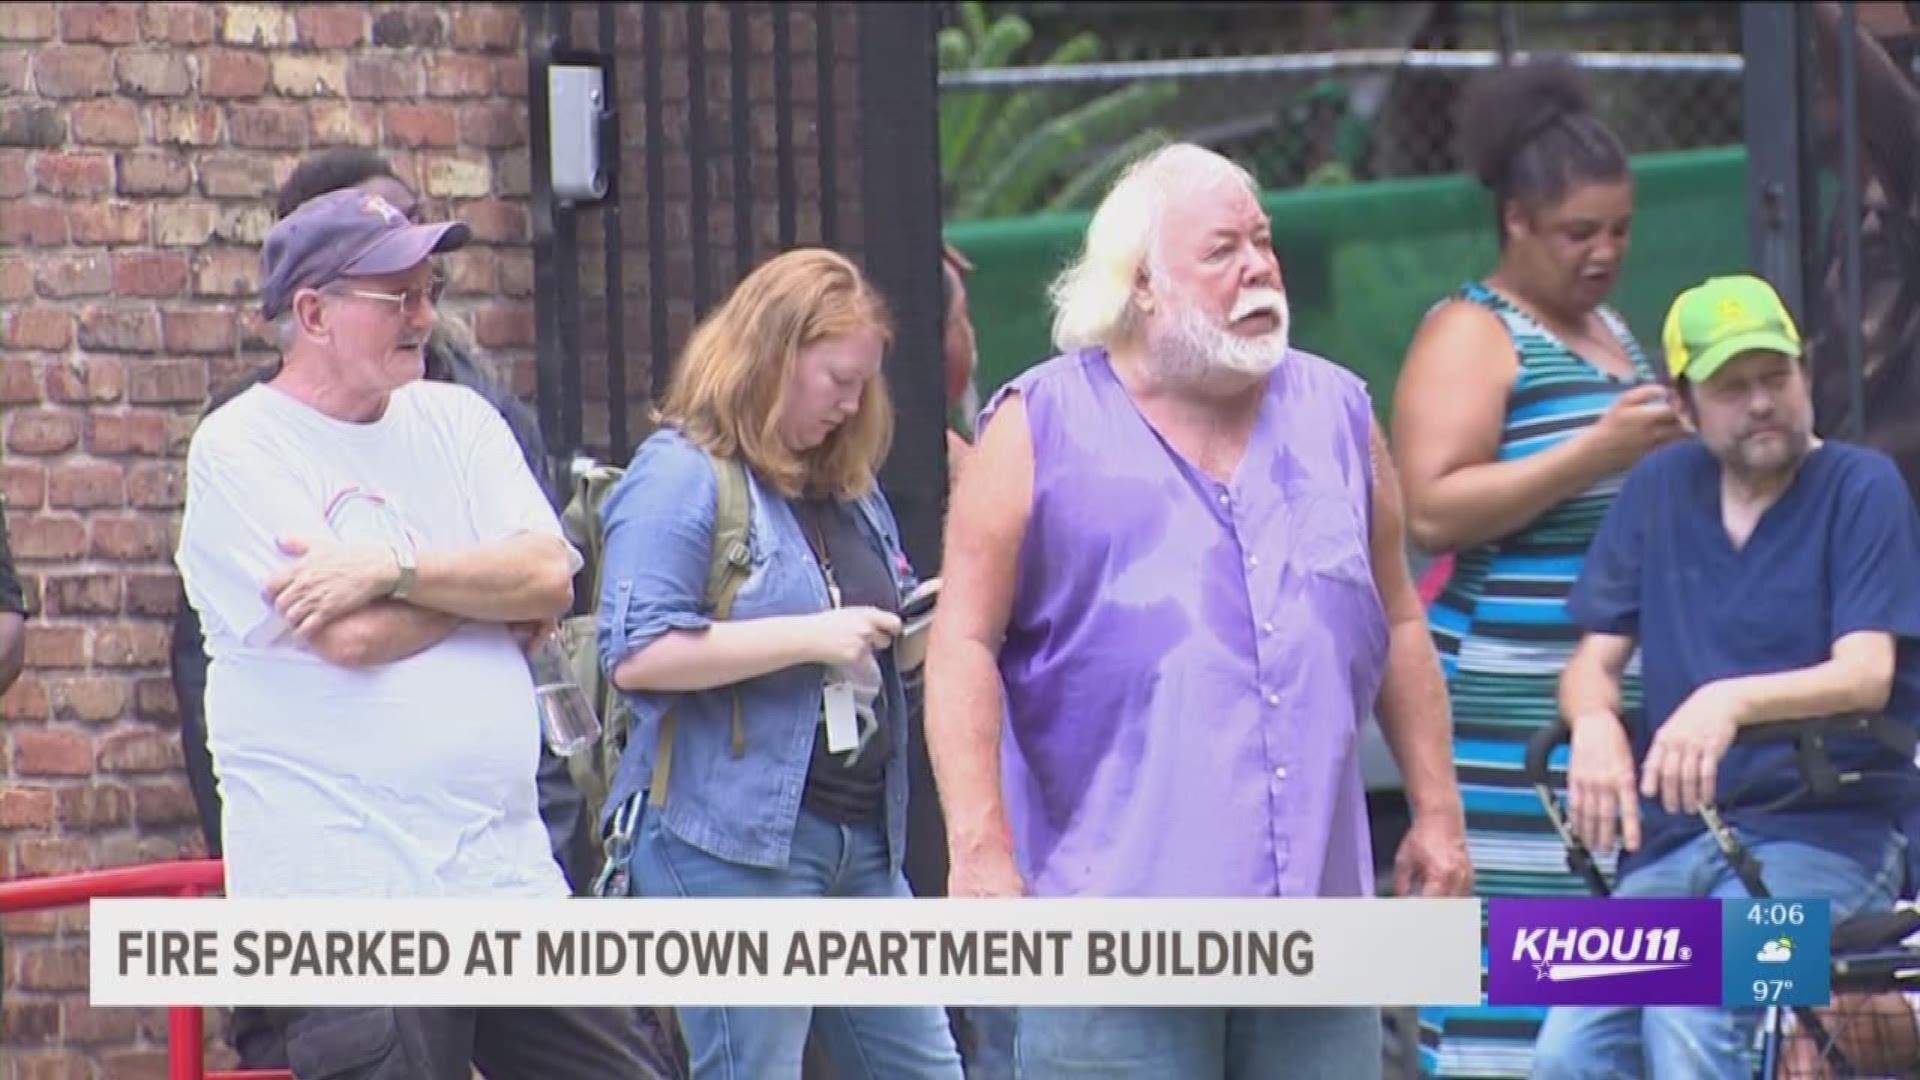 A large fire was sparked by an explosion at a midtown apartment building Tuesday morning. Residents were evacuated and no injuries were reported. 